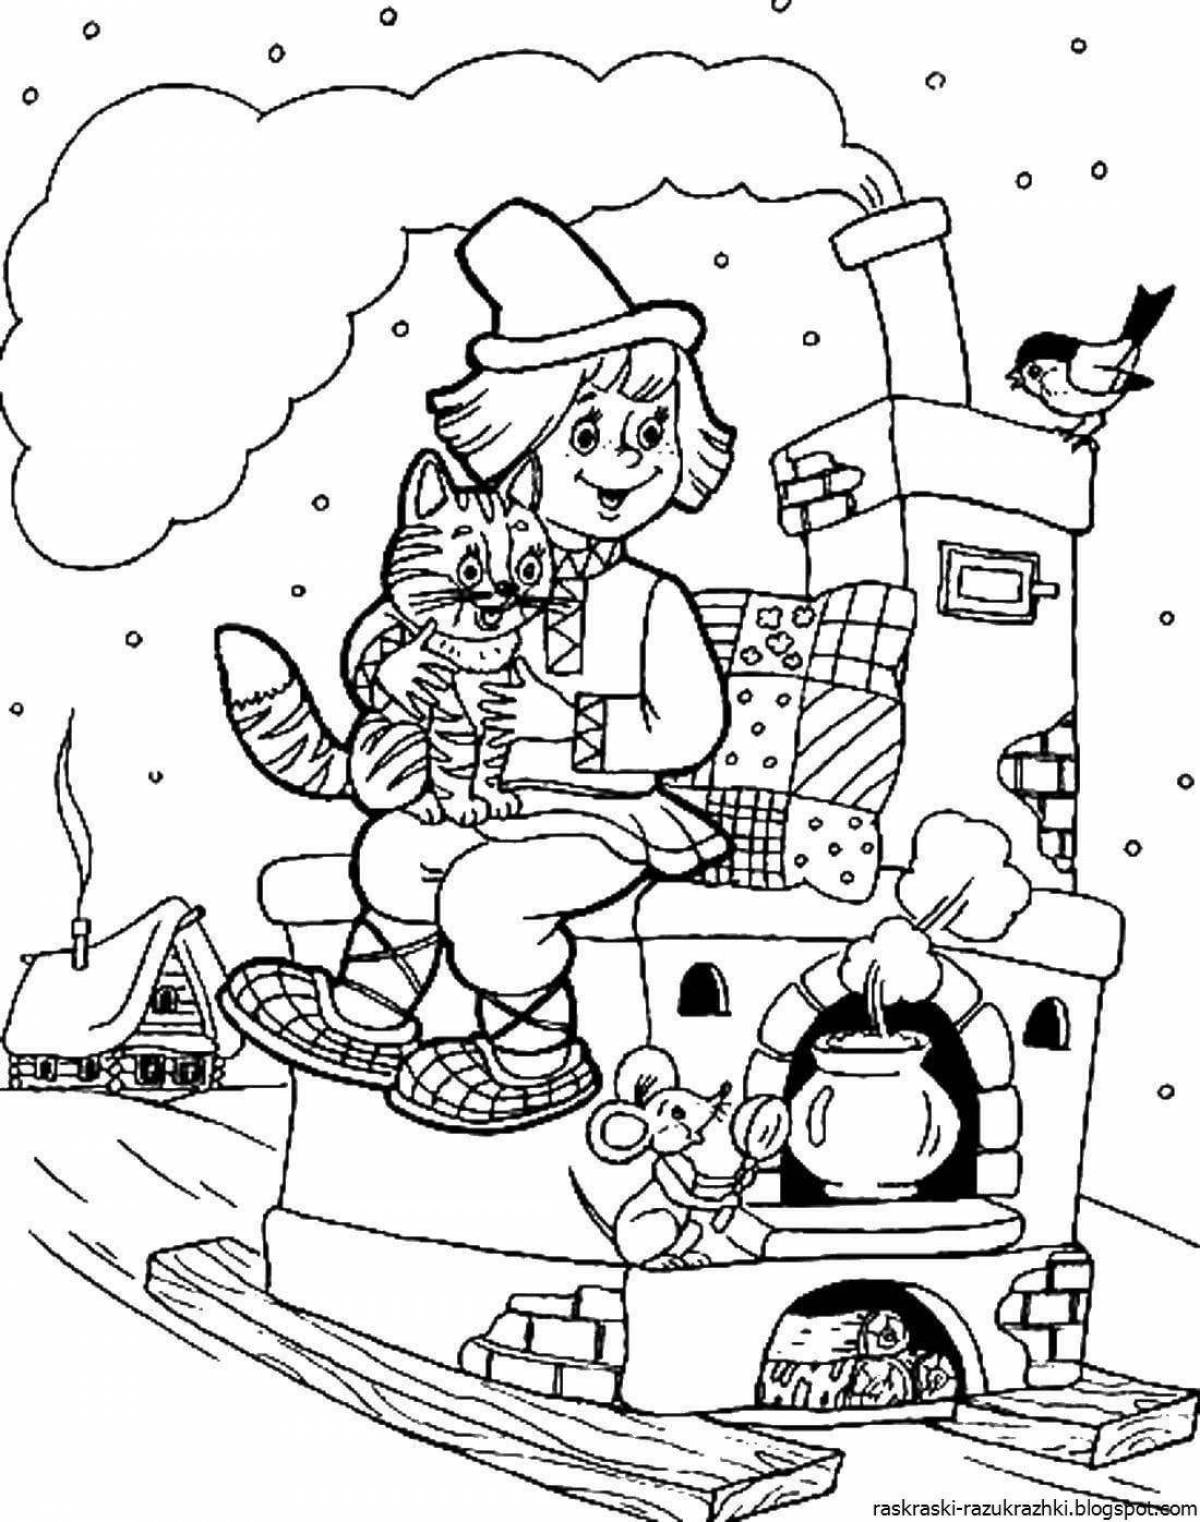 Complex slab coloring page